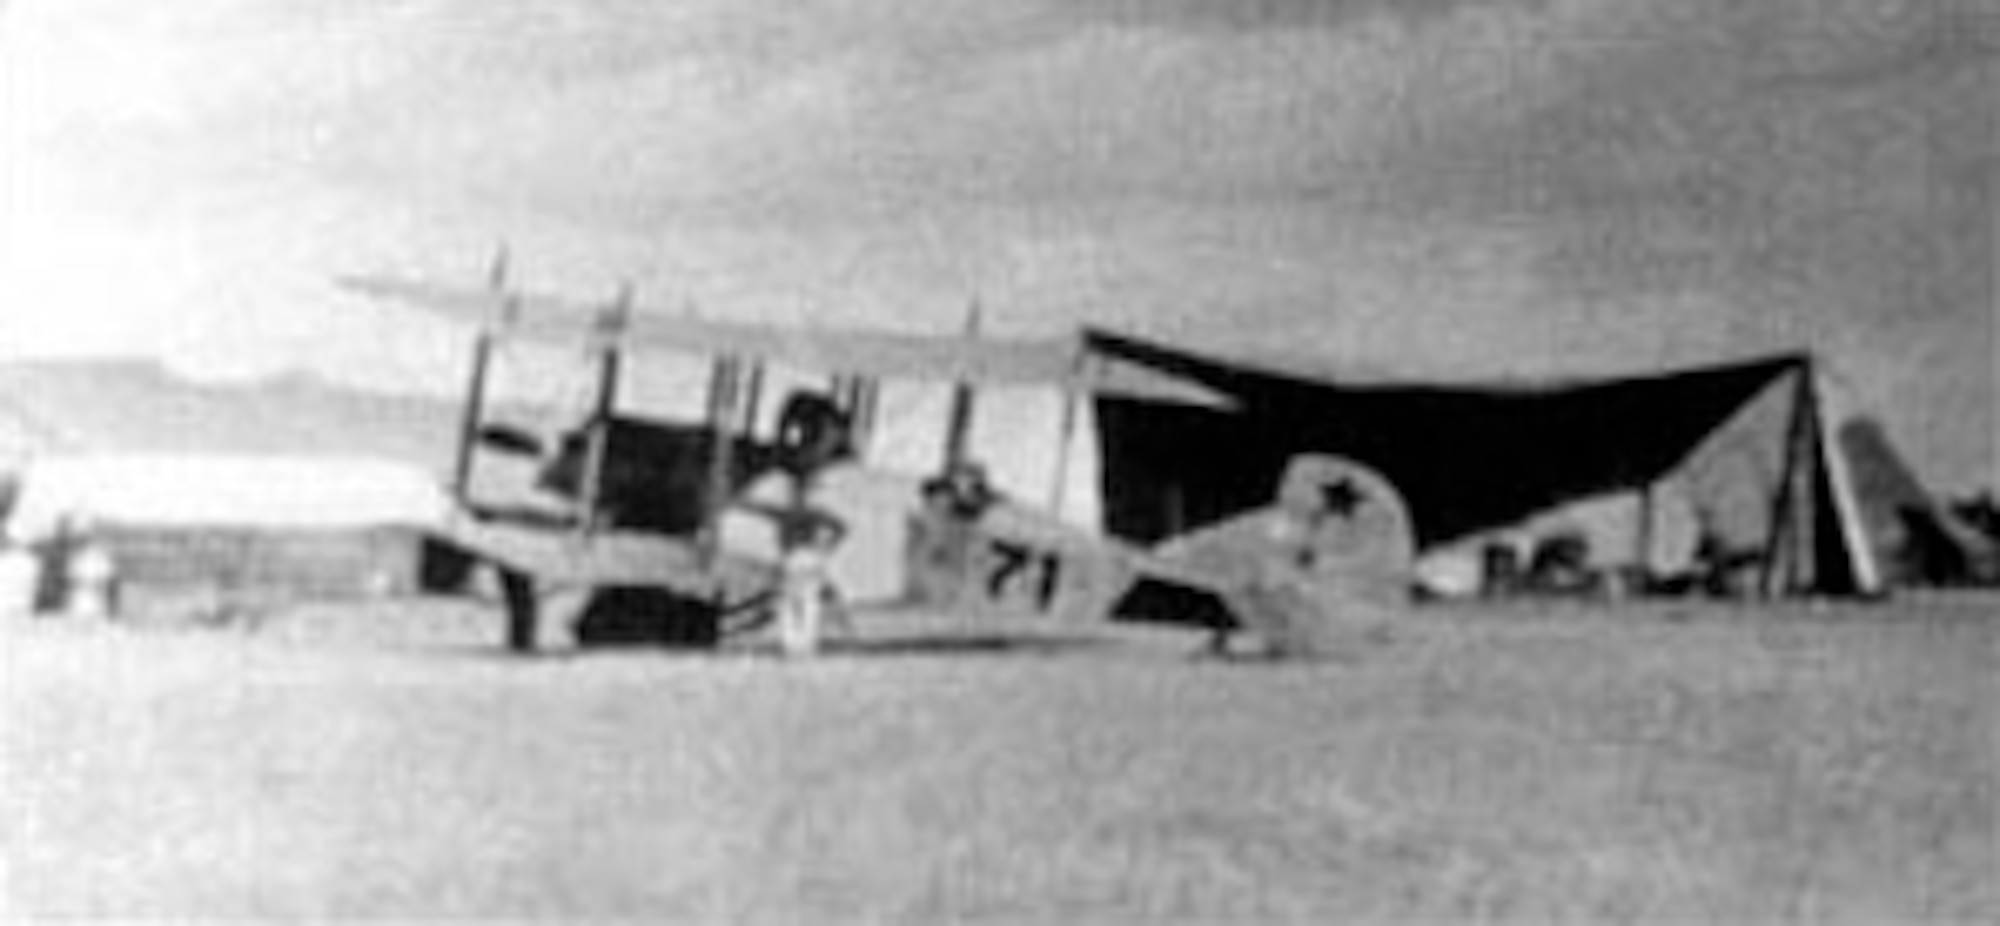 Curtiss R2 airplanes at Colonia Dublan in Northern Mexico. (U.S. Air Force photo)